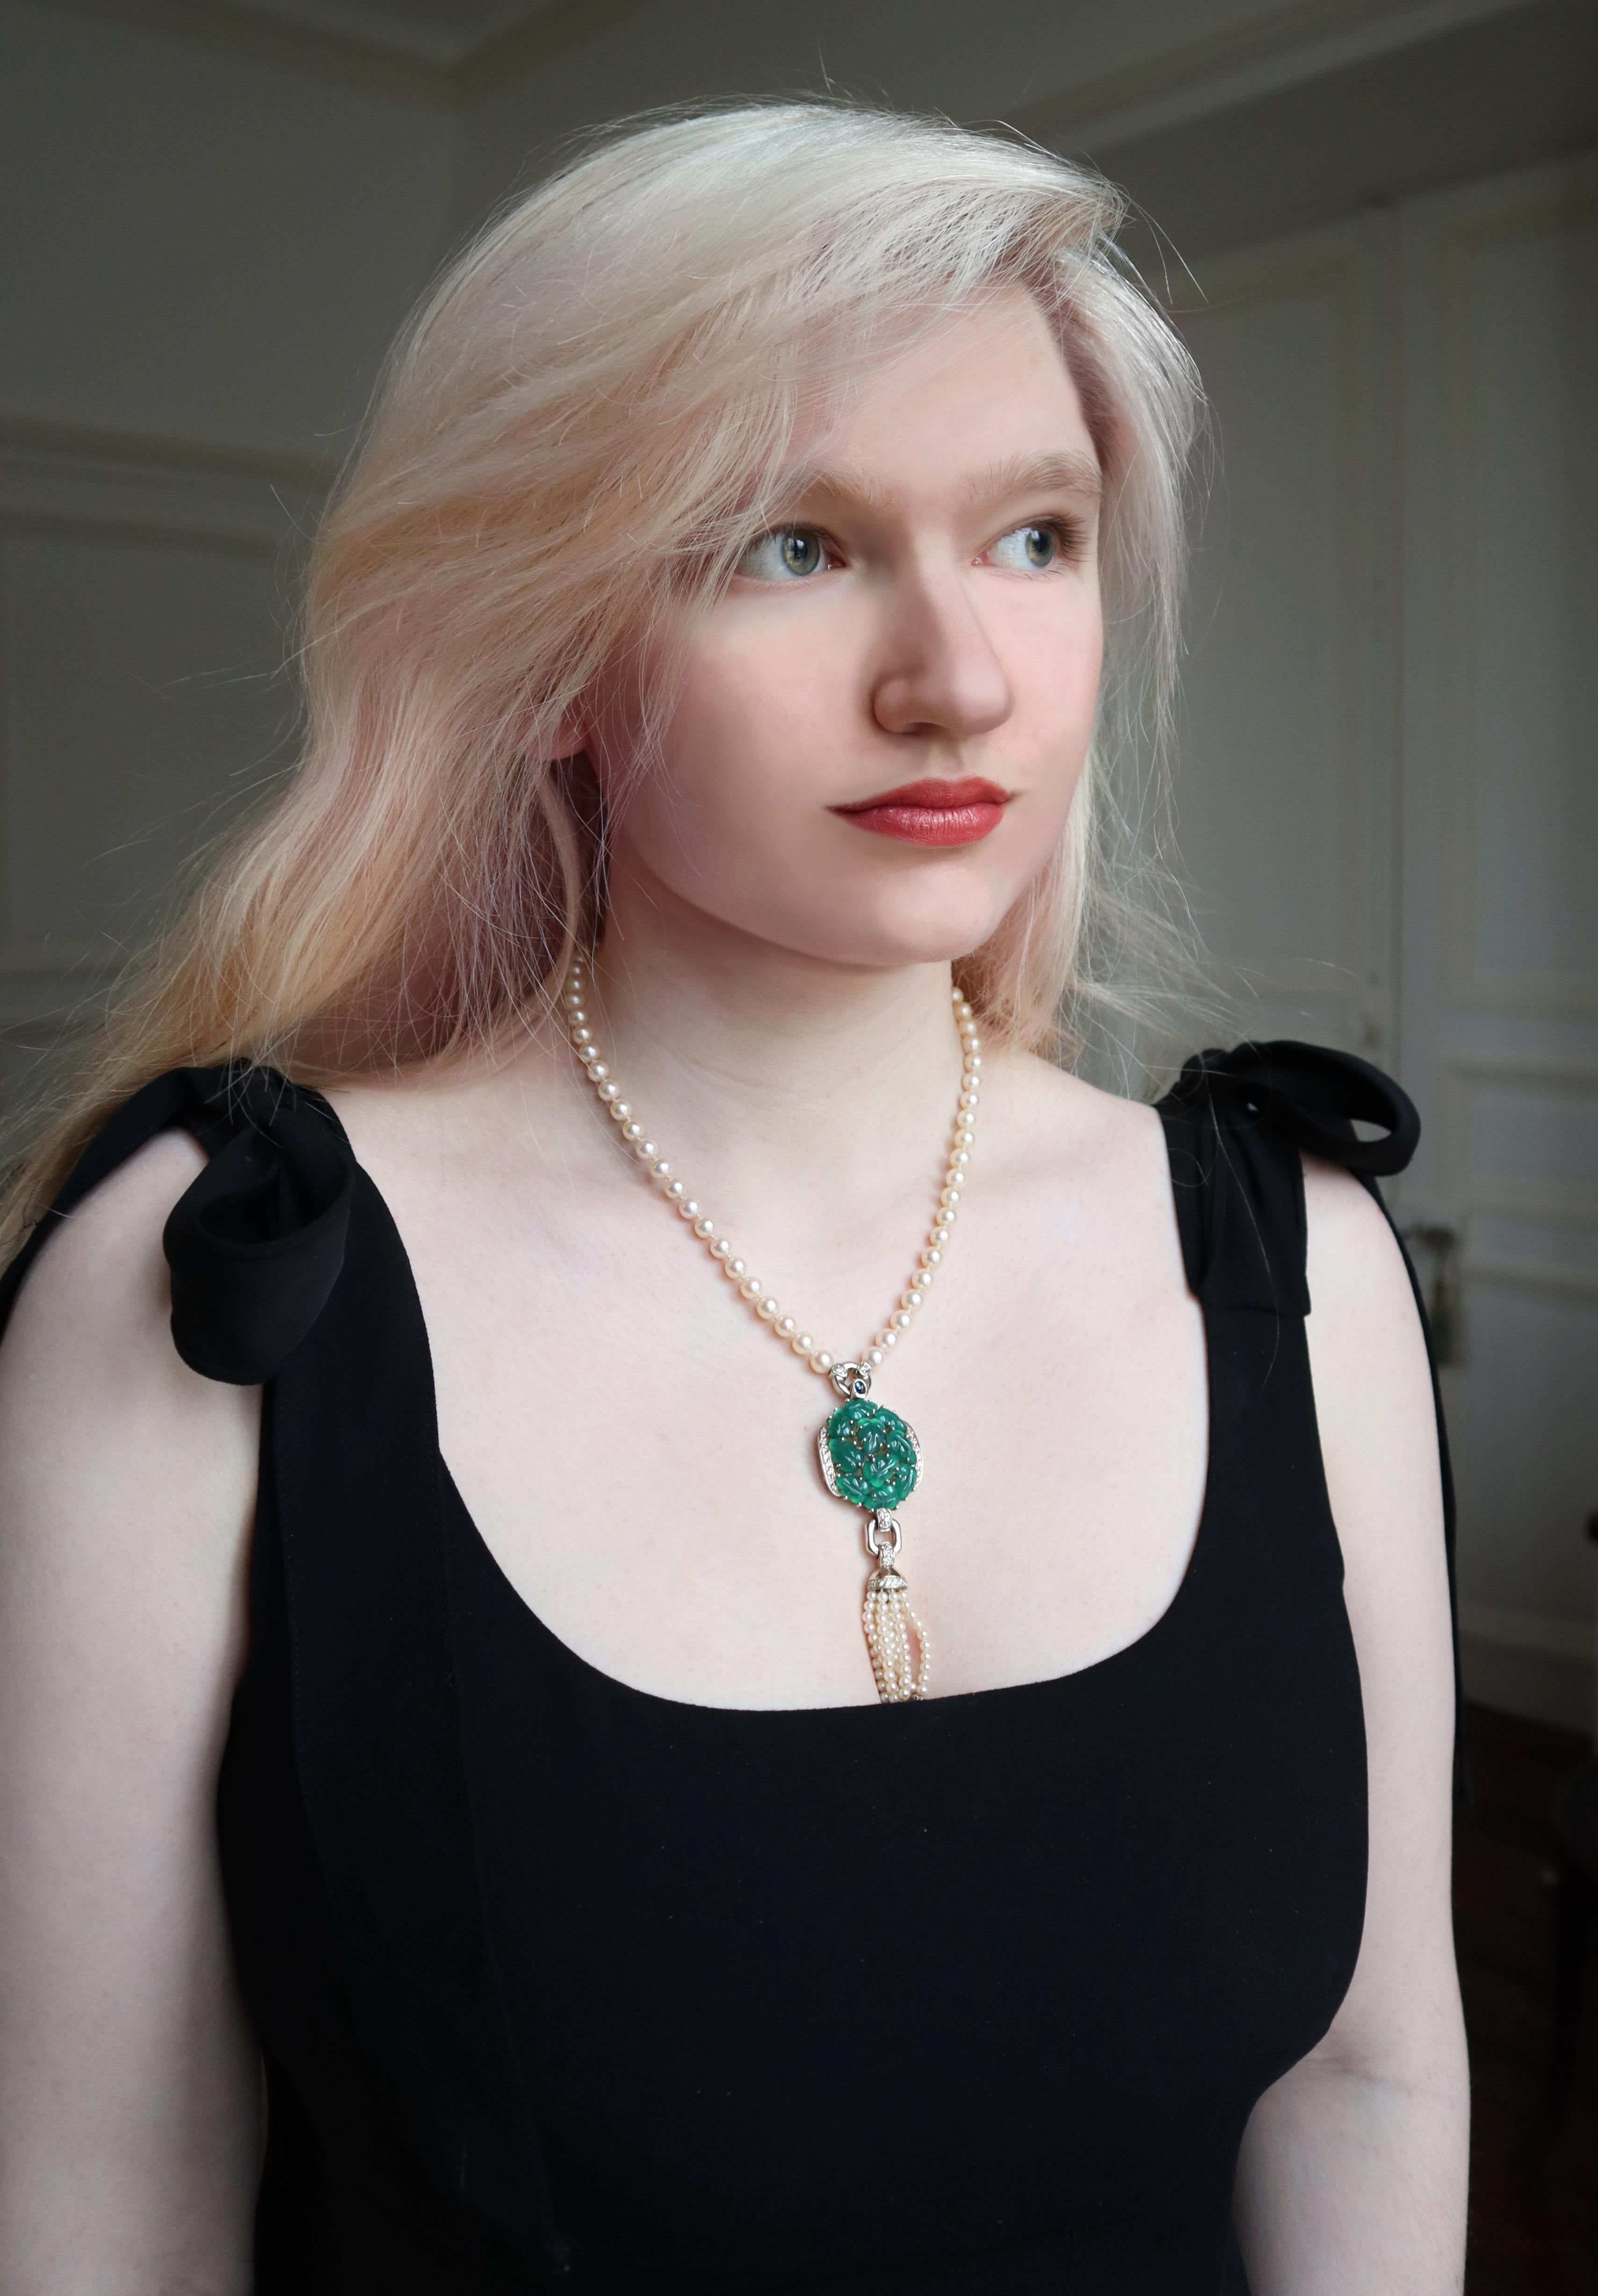 CARTIER Necklace in White Gold 18 kt, Pearls and Chrysoprases
Pearl Necklace retaining a large 18 kt white gold pendant, engraved Chrysoprases in the shape of Leaves, Diamonds, Cabochon Sapphire and ending with a beaded Tassel and Pearls of 18